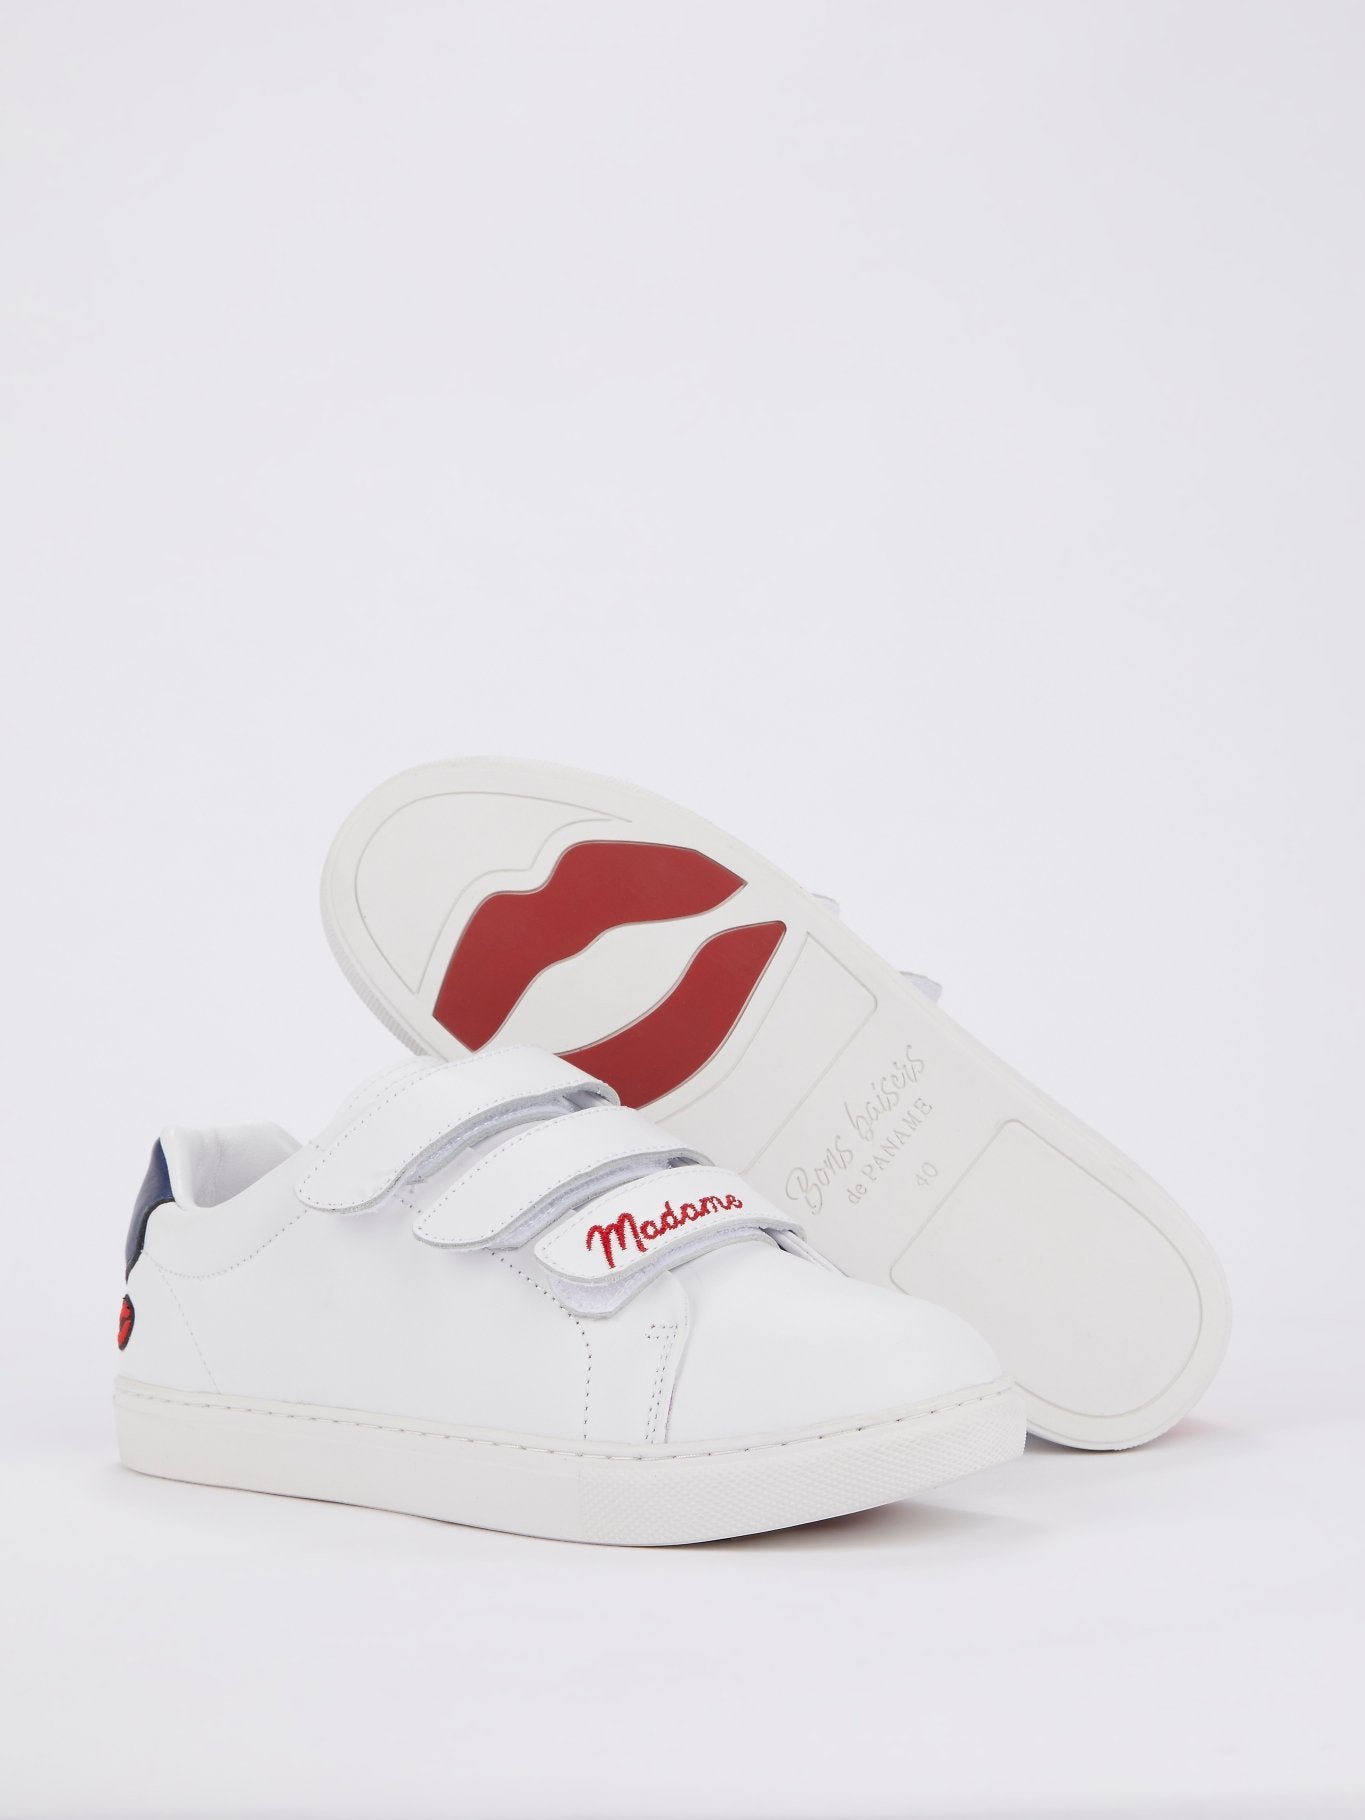 Edith Mismatched Heel Patch Sneakers